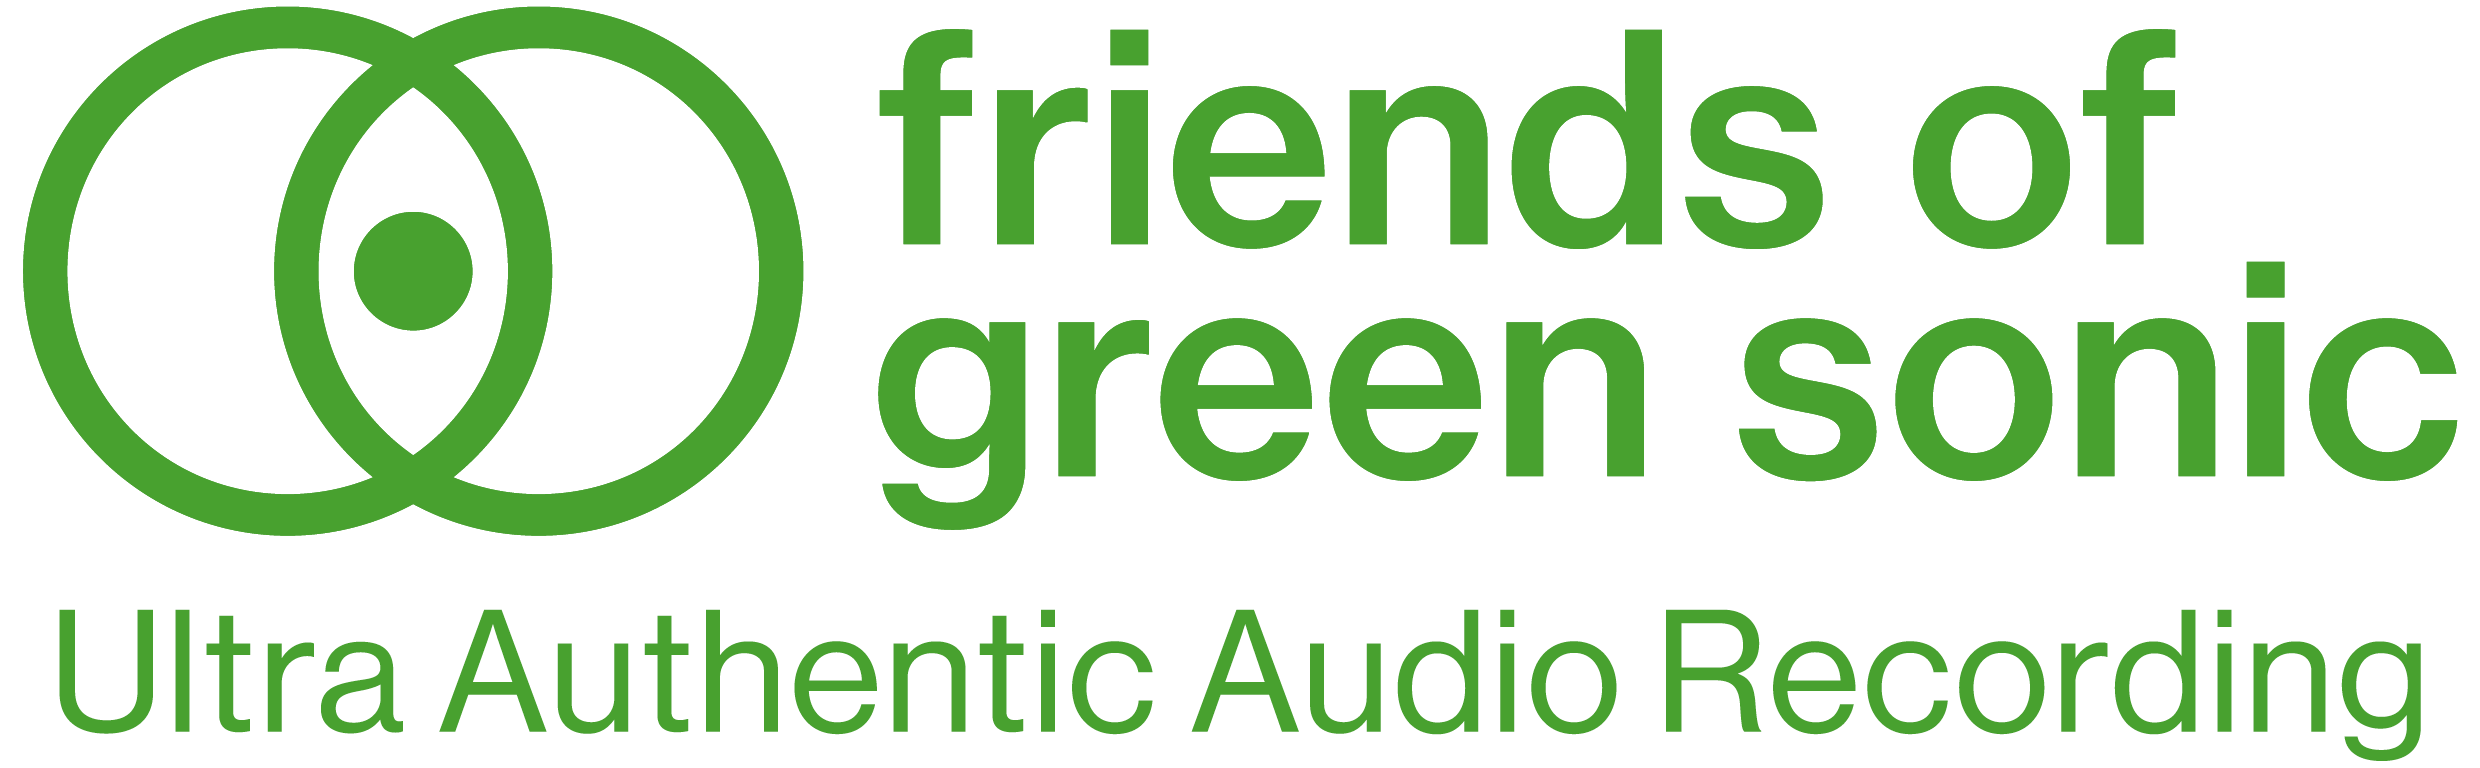 friends of green sonic – Ultra Authentic Audio Recording Logo